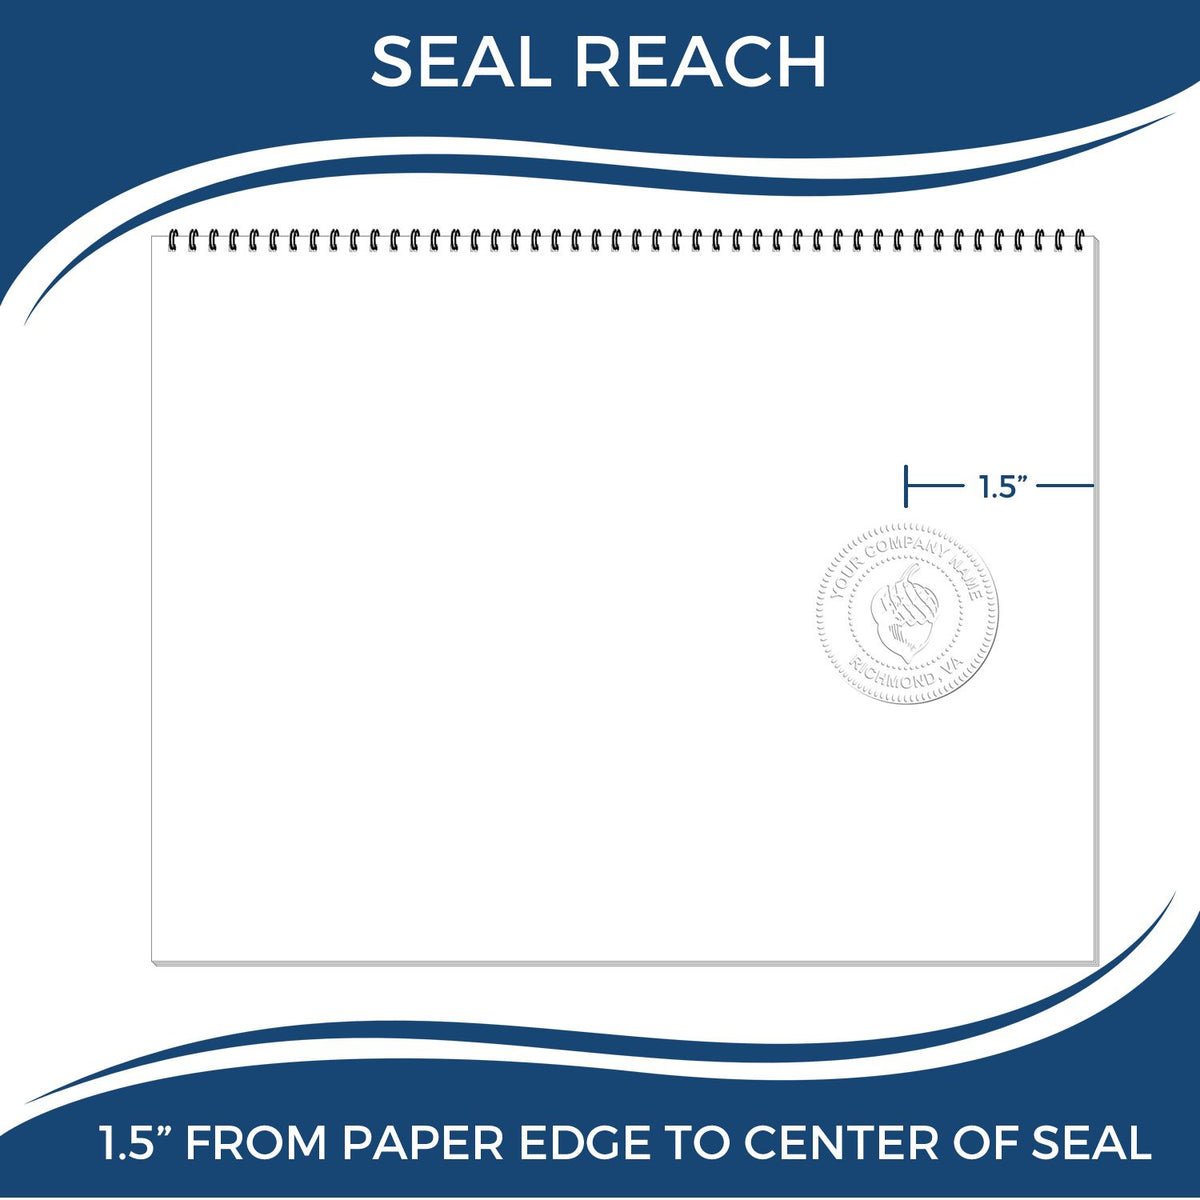 An infographic showing the seal reach which is represented by a ruler and a miniature seal image of the Hybrid North Dakota Land Surveyor Seal